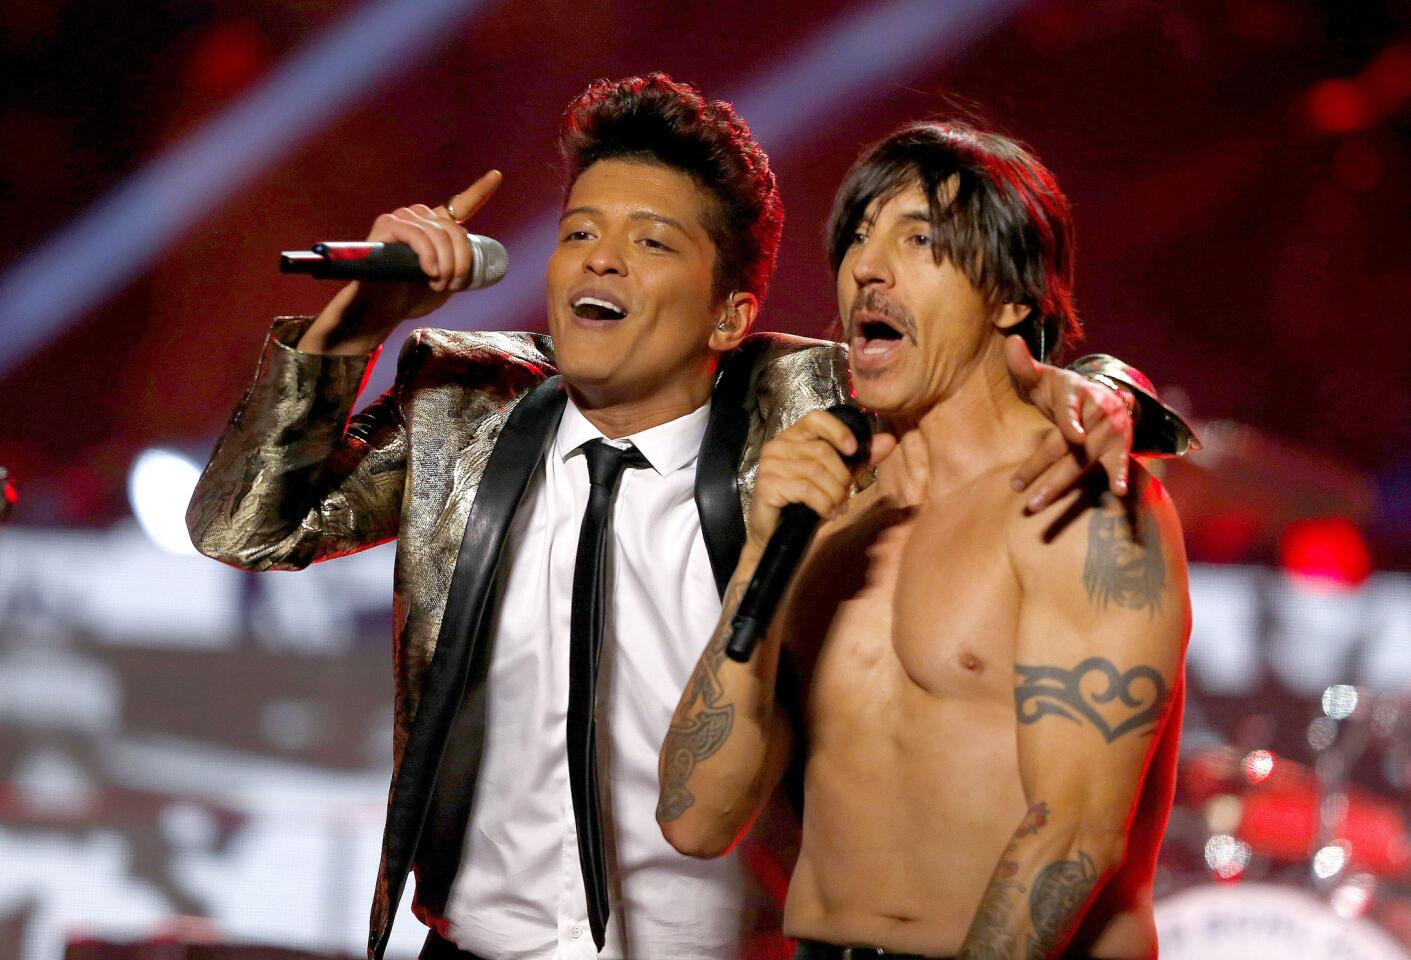 Bruno Mars featuring Red Hot Chili Peppers | 2014